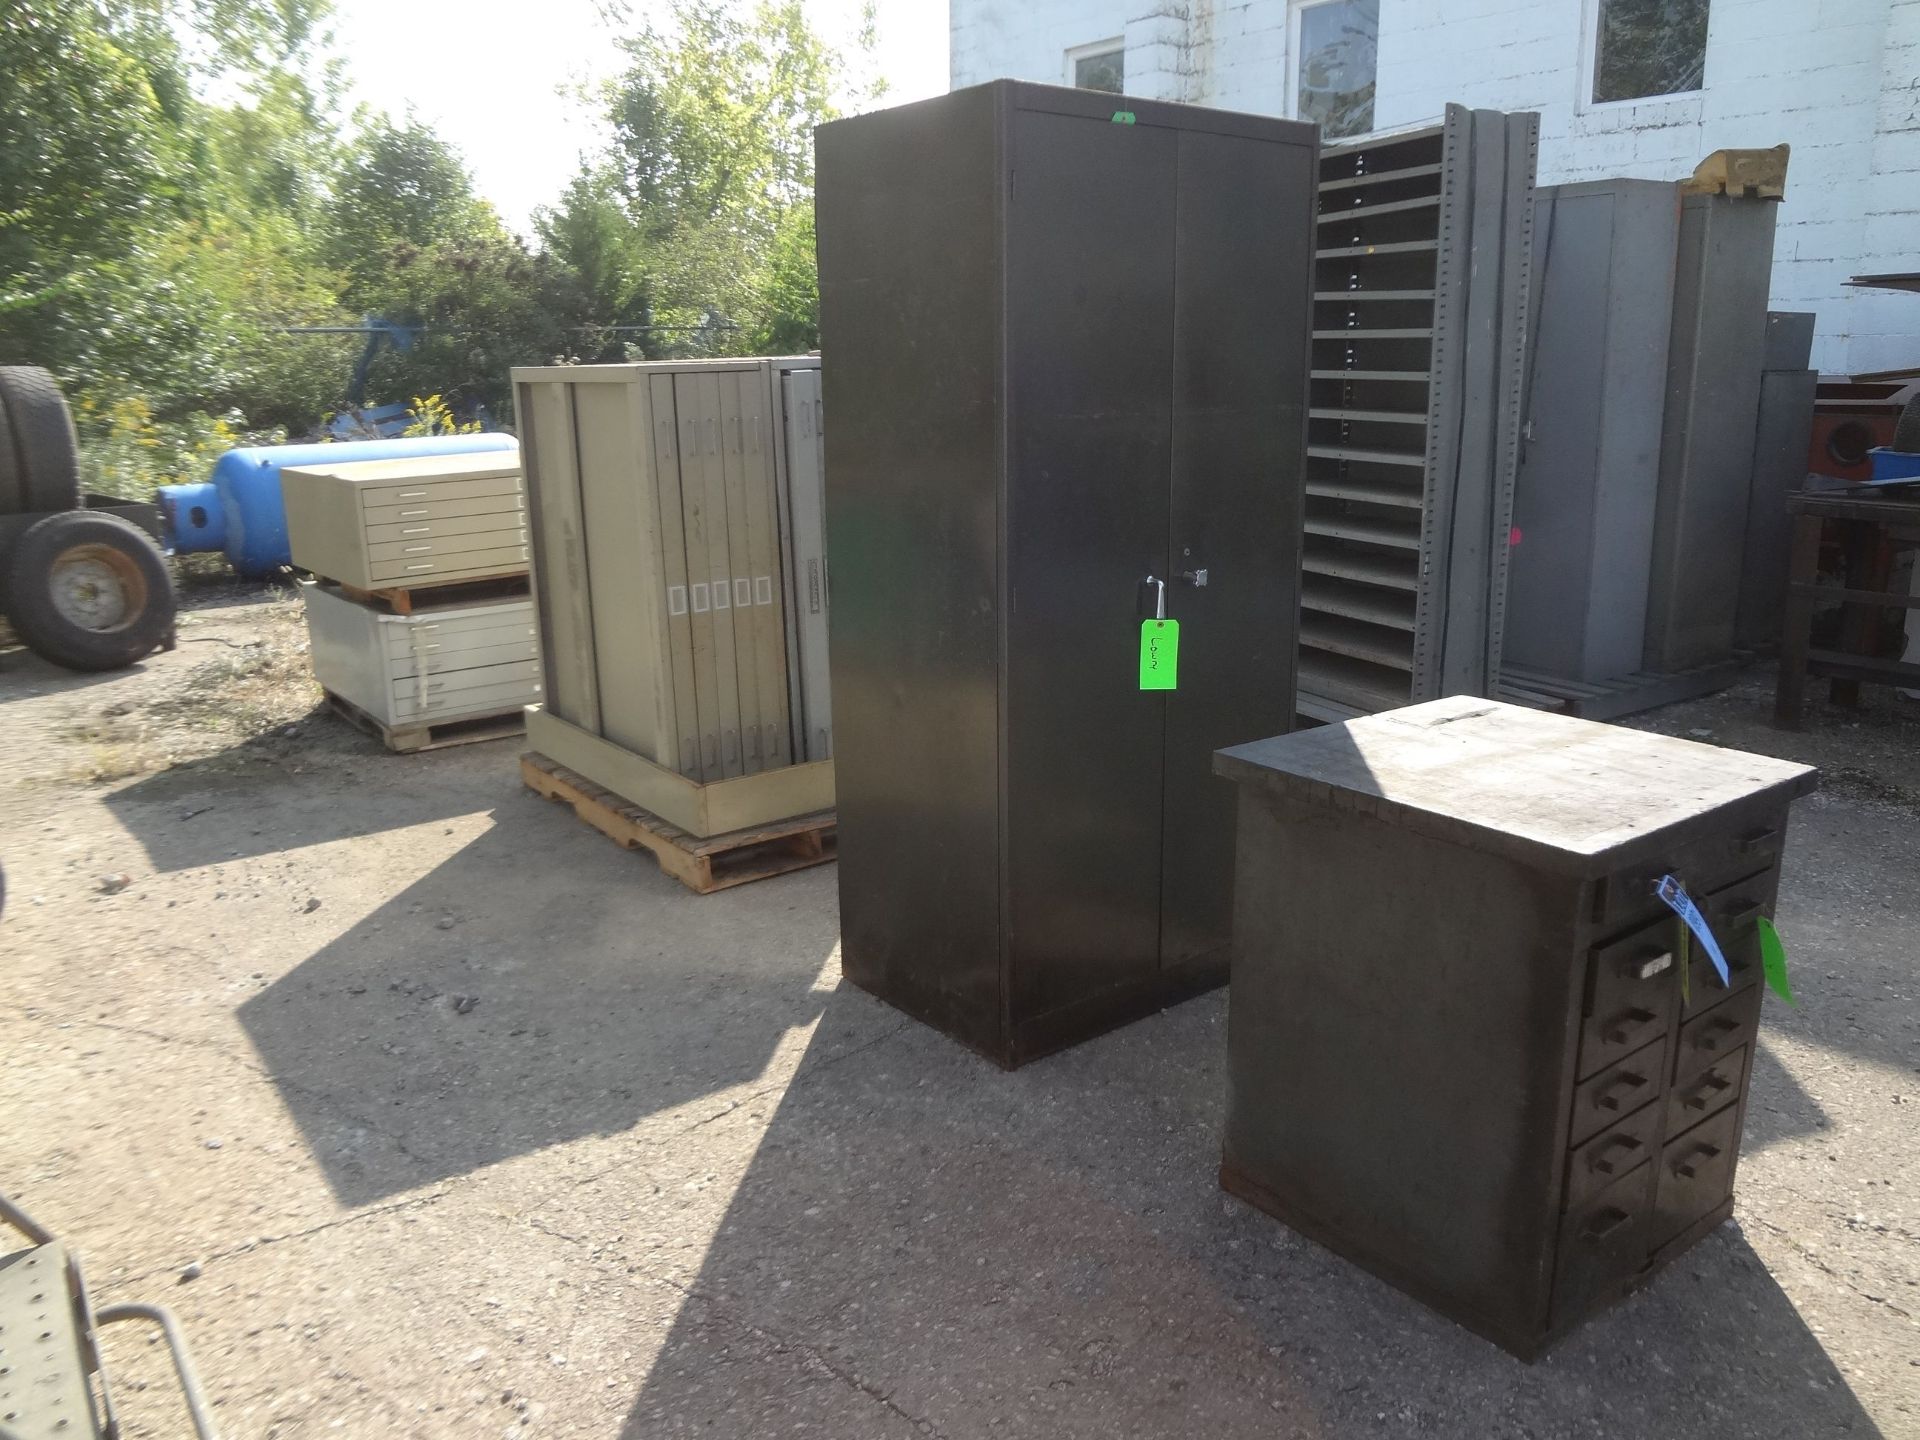 (LOT) CABINETS - LOCATED AT 700 N. JAMES ROAD, COLUMBUS, OH 43219